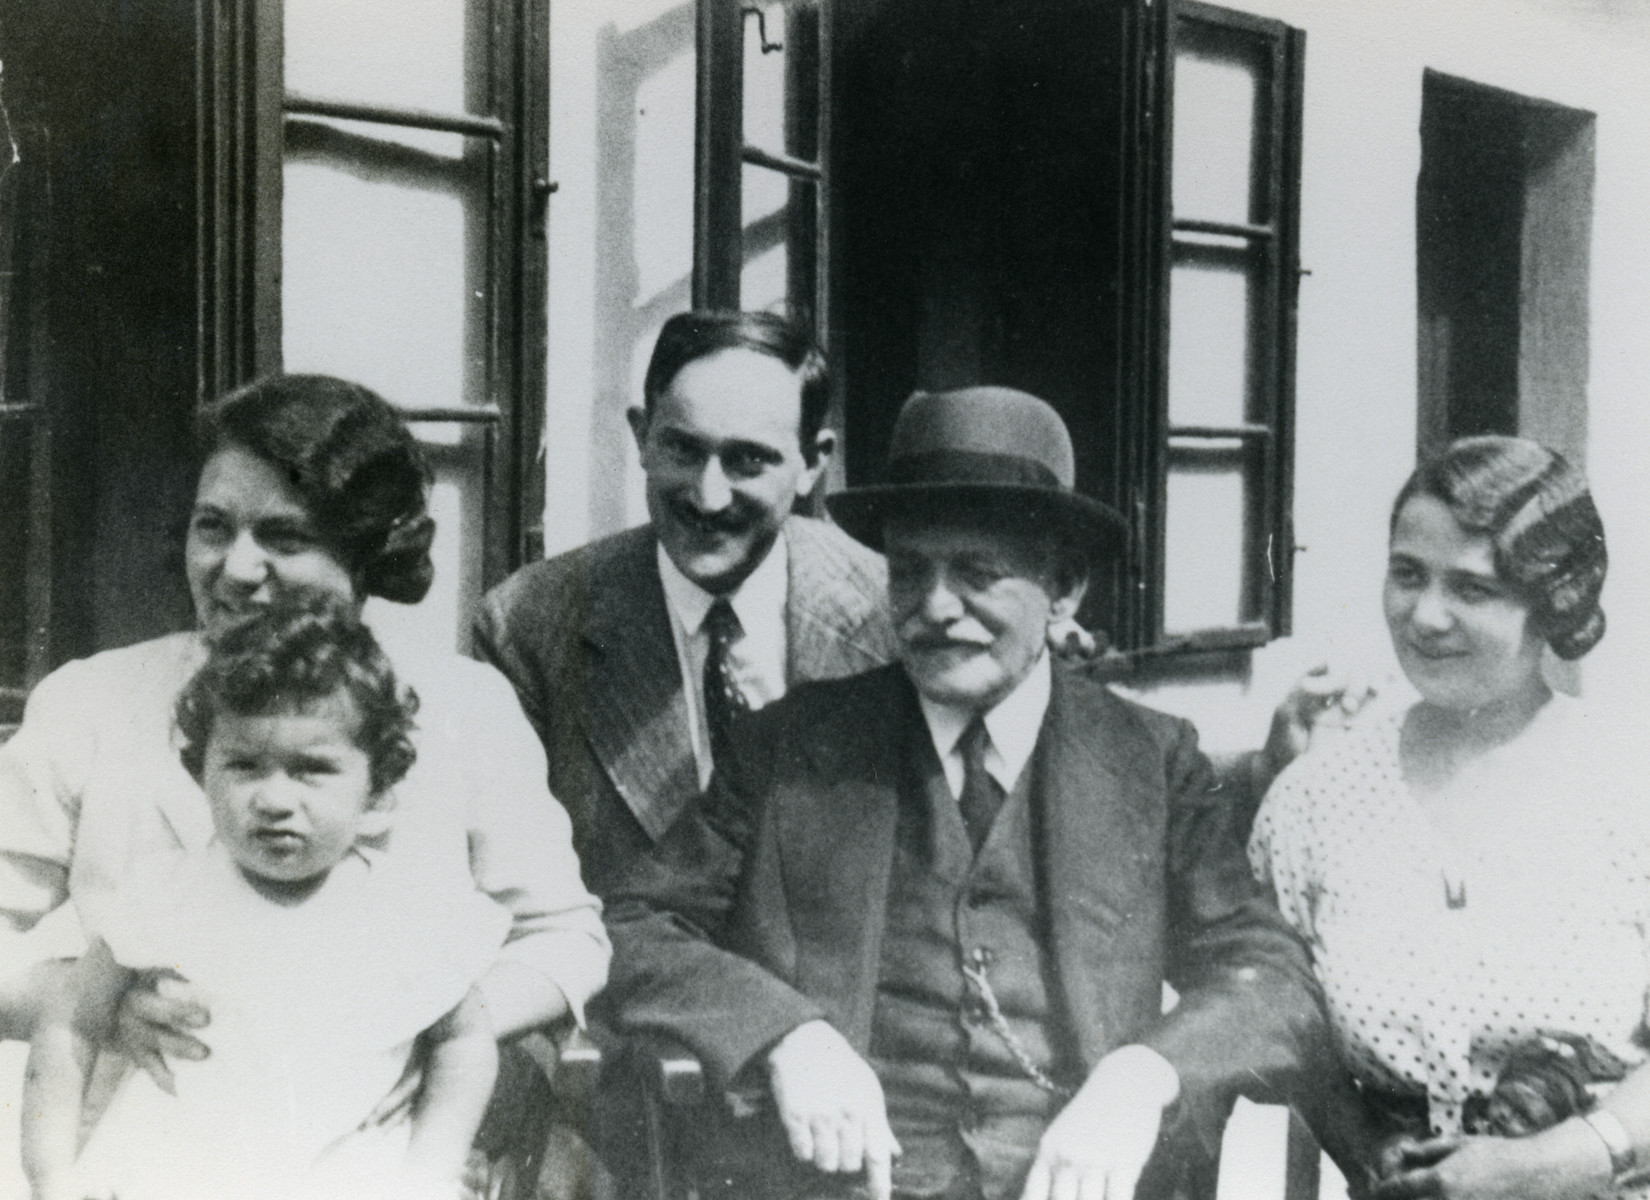 Group portrait of the Krausz and Jeiteles family.

From left to right: Dr. Lydie Krausz holding her daughter Helene Doris, Dr. Gajza Krausz, Dr. Isidor Jeiteles, one of Lydie's sisters.